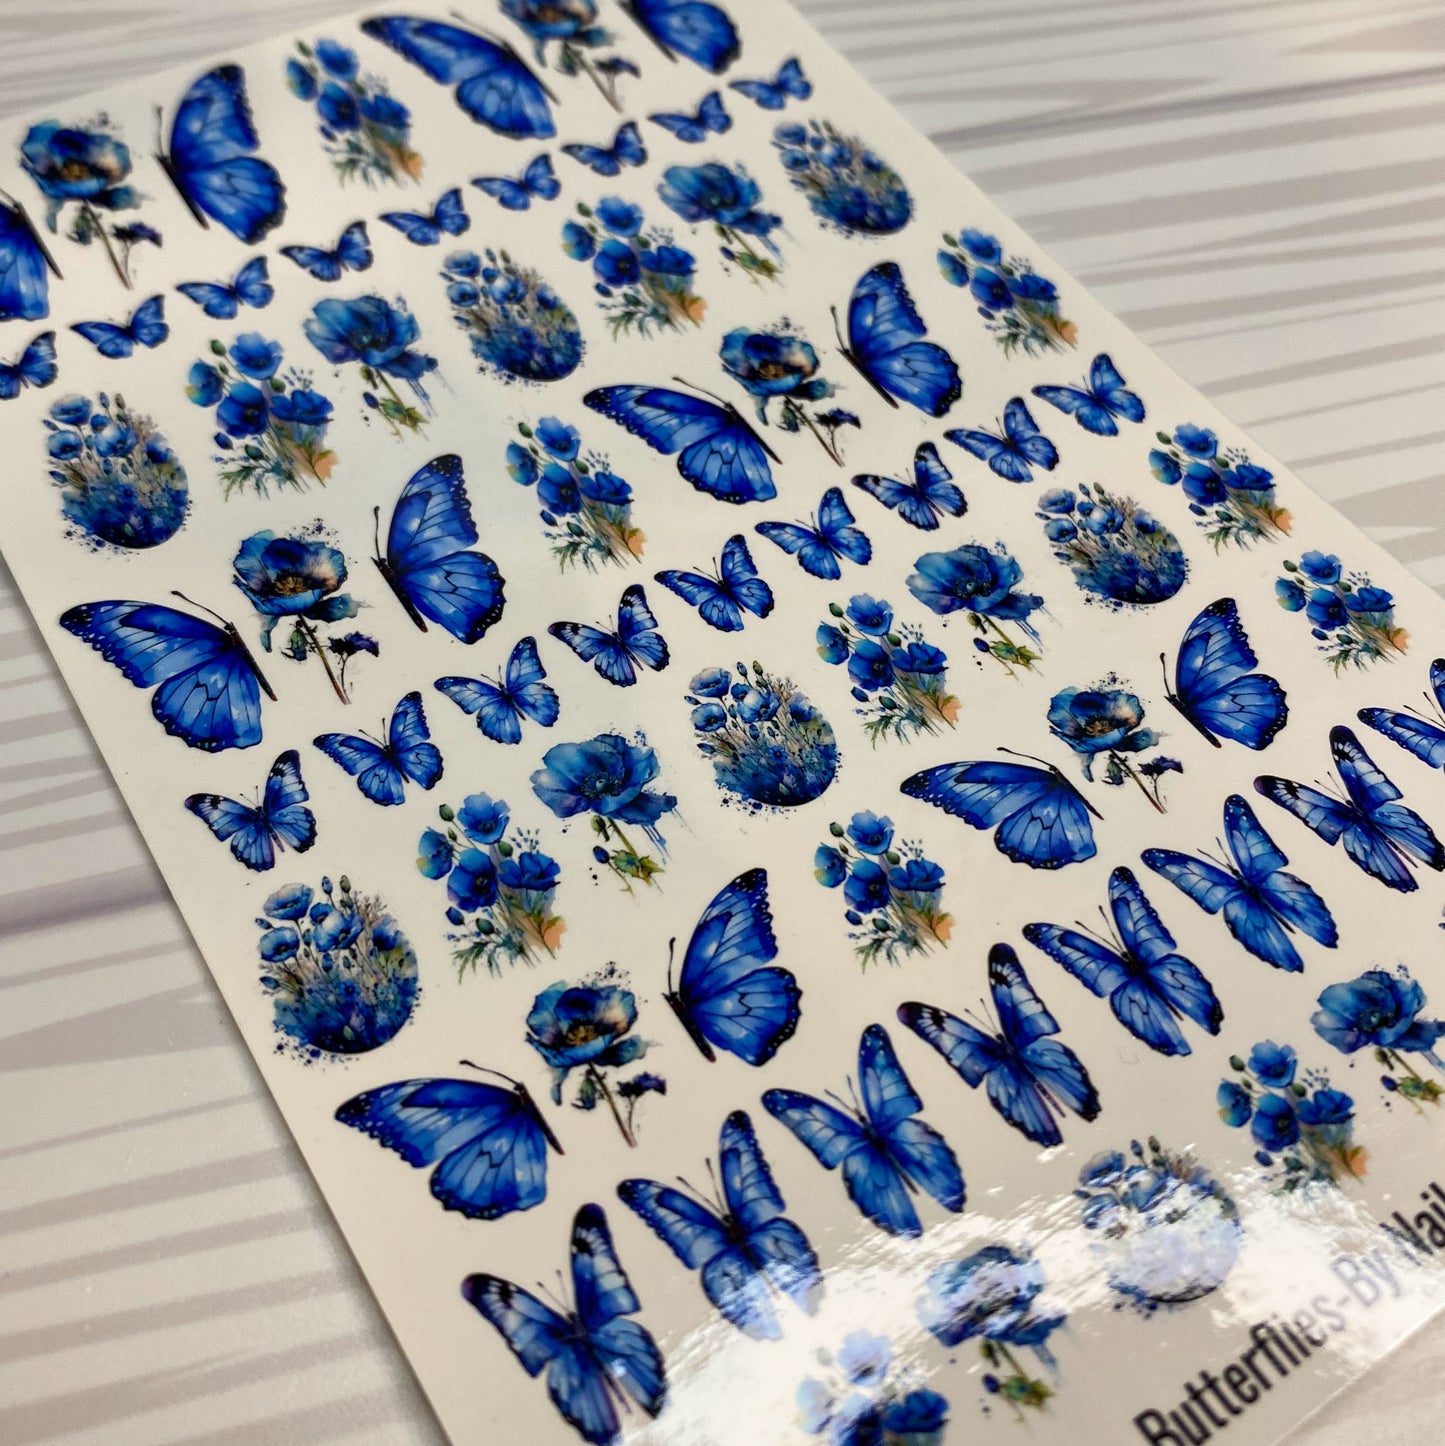 Memorial Day Nail Art - Justice Butterflies  - Decals For Nails